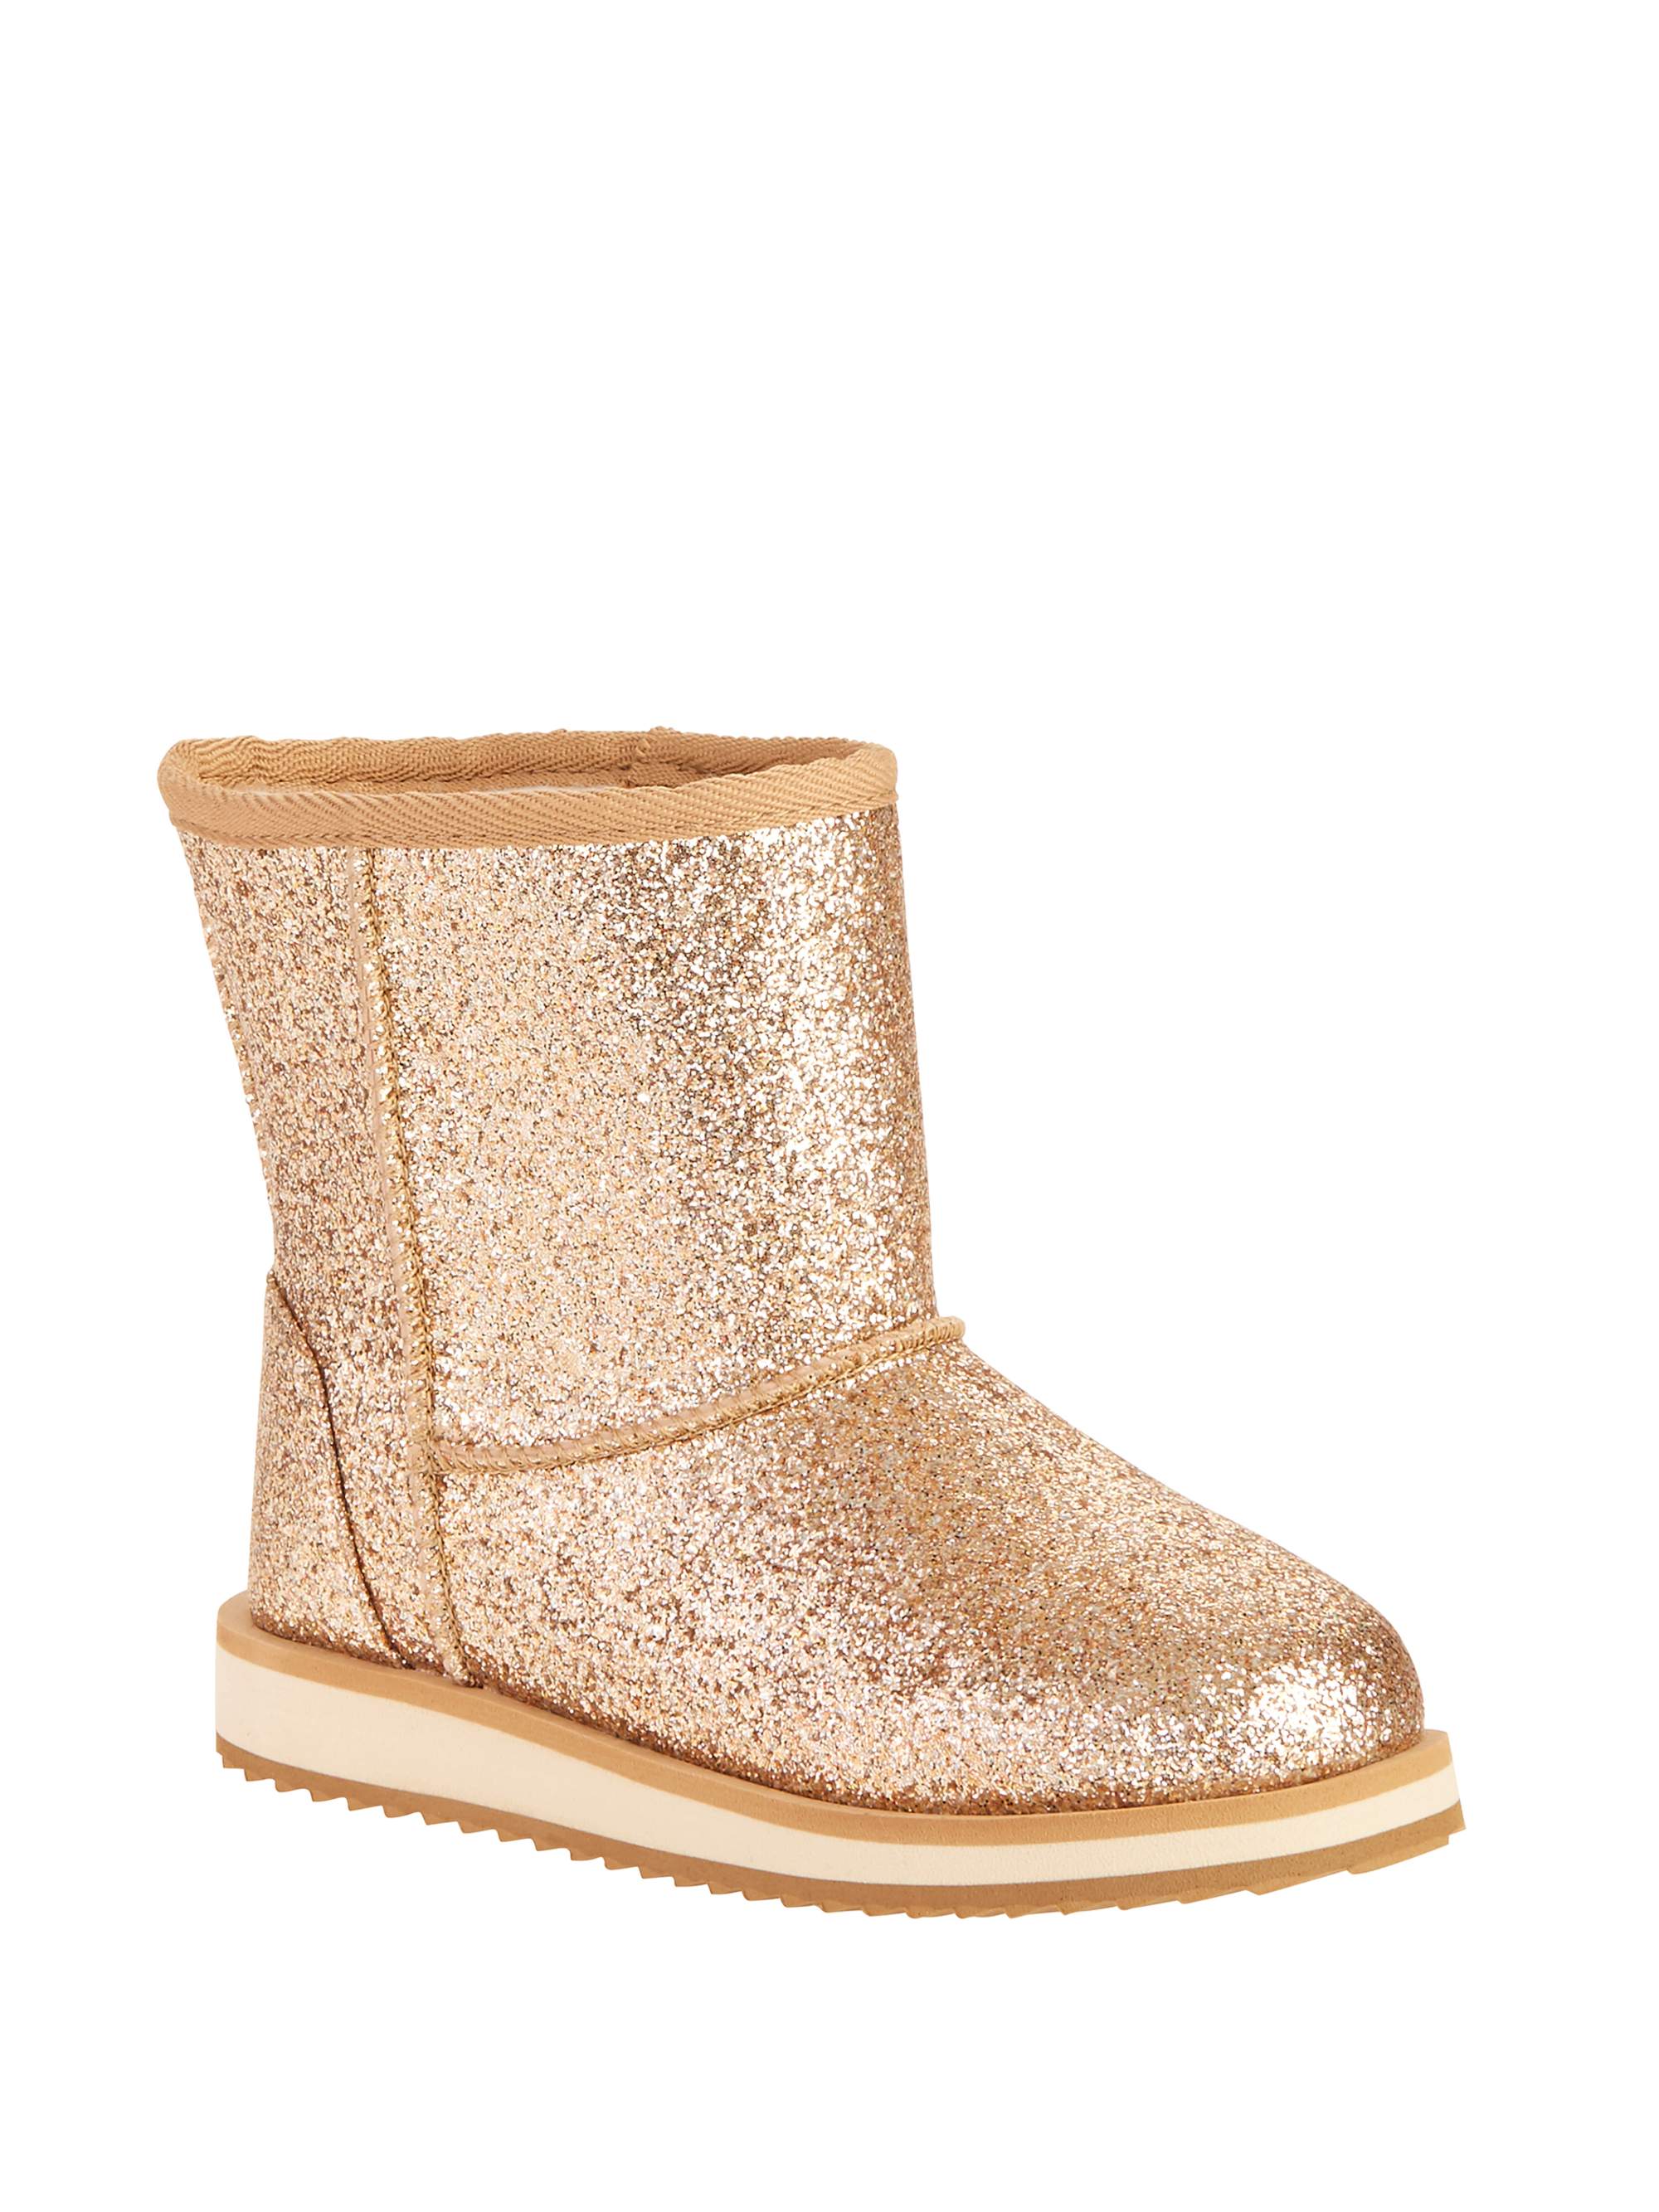 Wonder Nation Girls Faux Shearling Boots - image 1 of 6